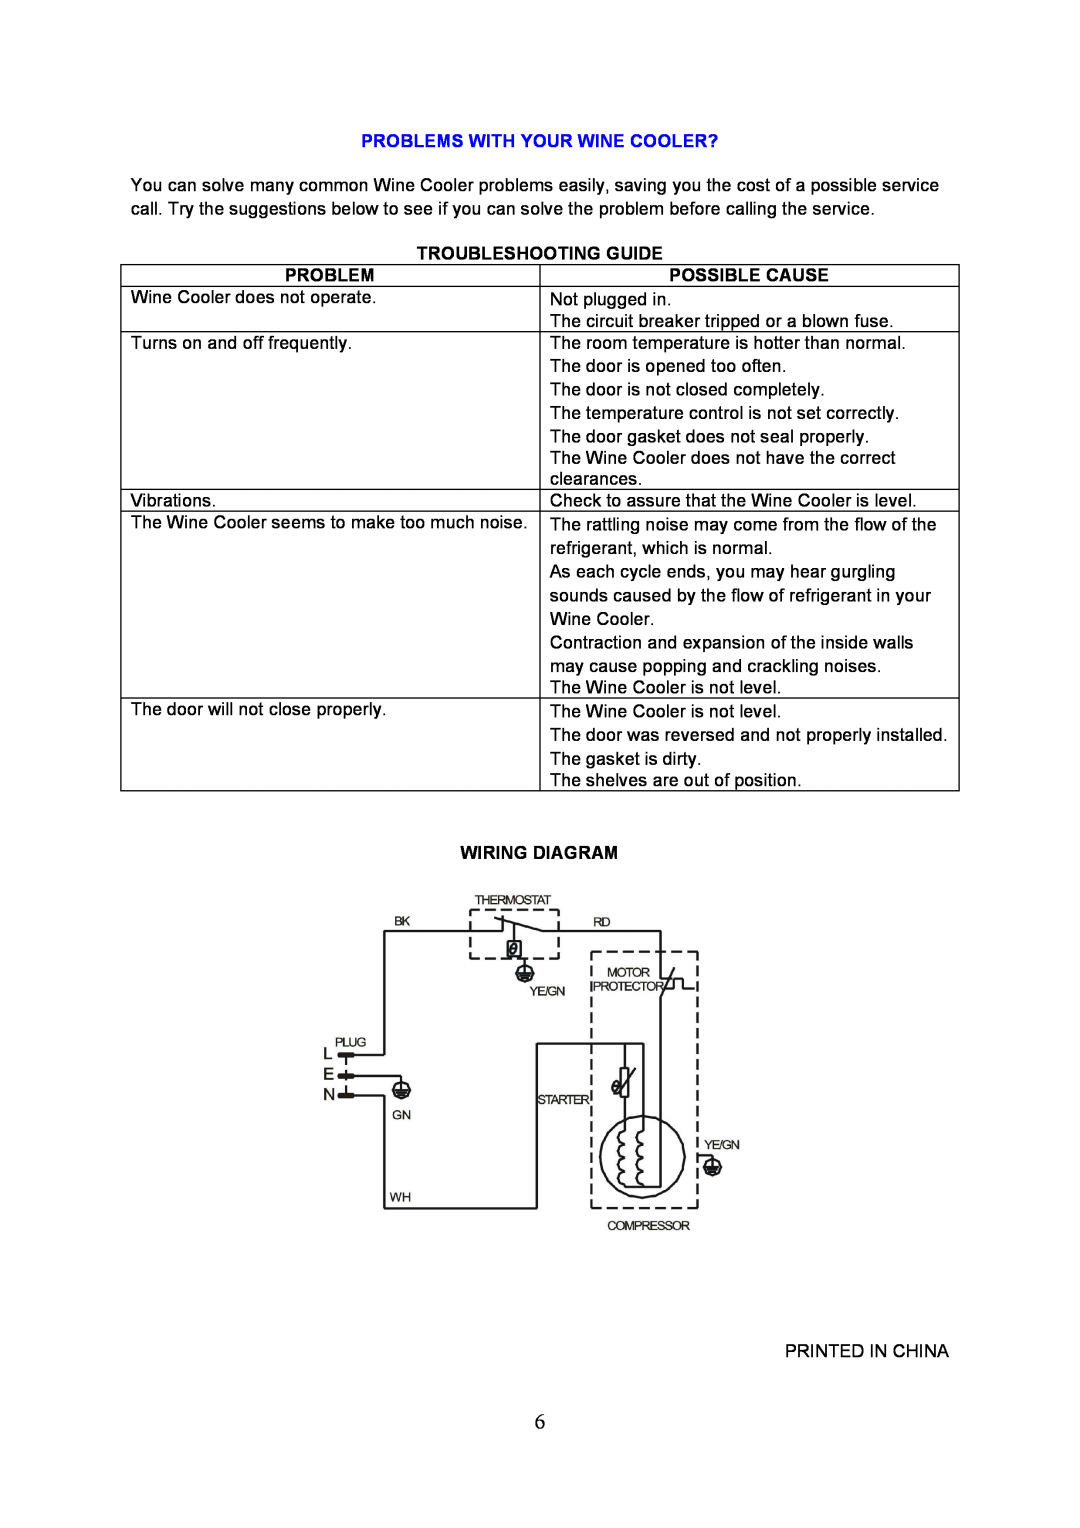 Igloo FRW154C instruction manual Problems With Your Wine Cooler?, Troubleshooting Guide, Possible Cause, Wiring Diagram 